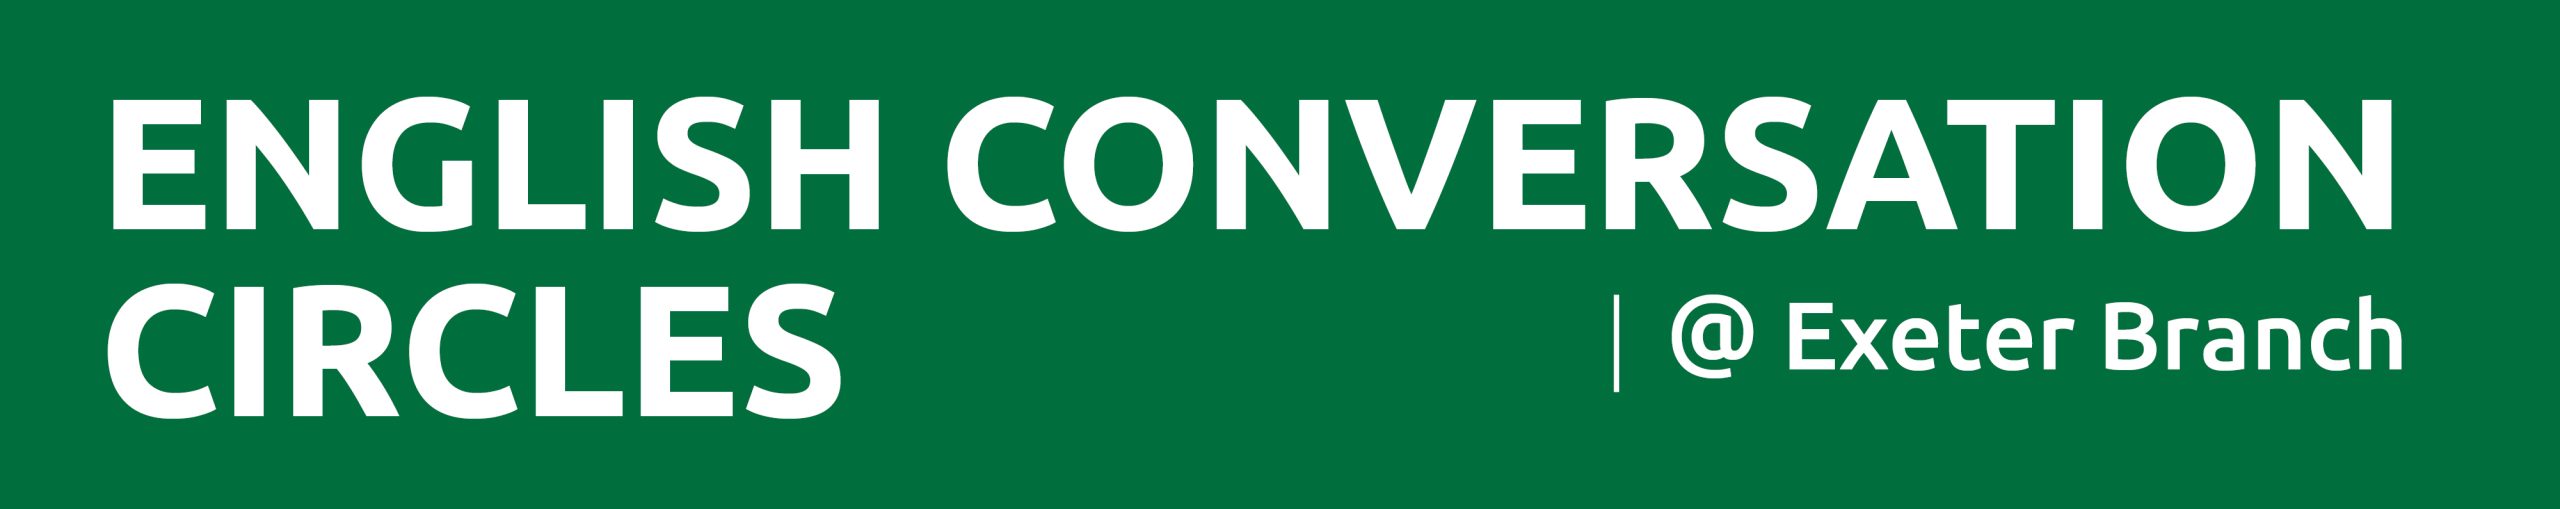 Dark green rectangle with text promoting English conversation circles at Exeter branch